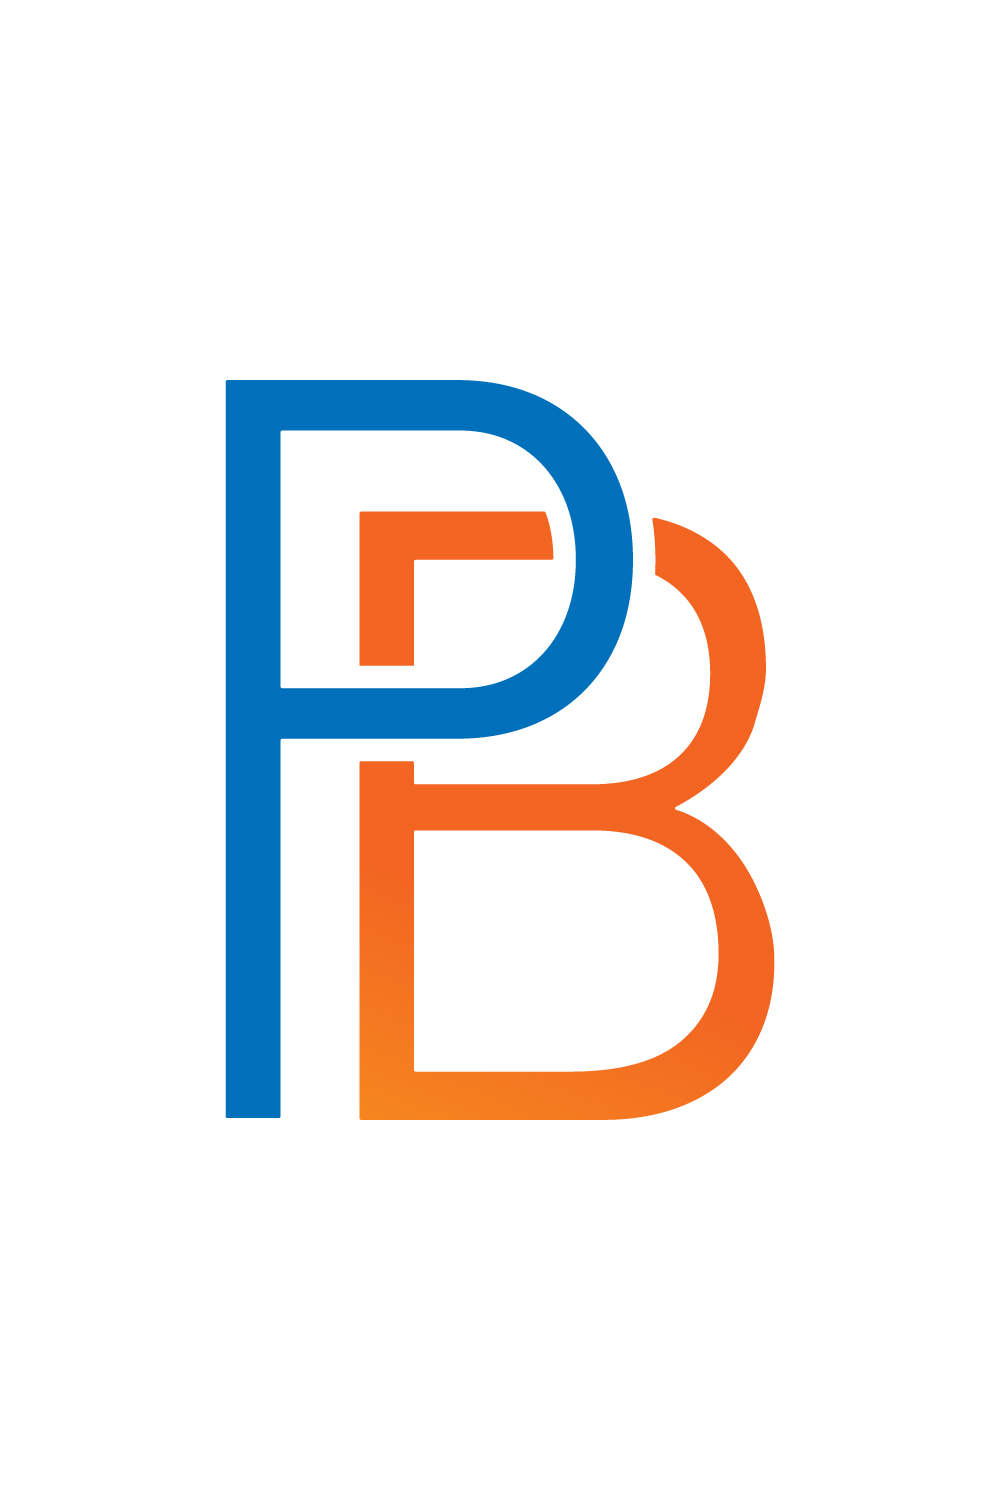 Initials PB letters logo design vector images PB logo design vector template illustration BP logo orange ang blue color best company identity pinterest preview image.